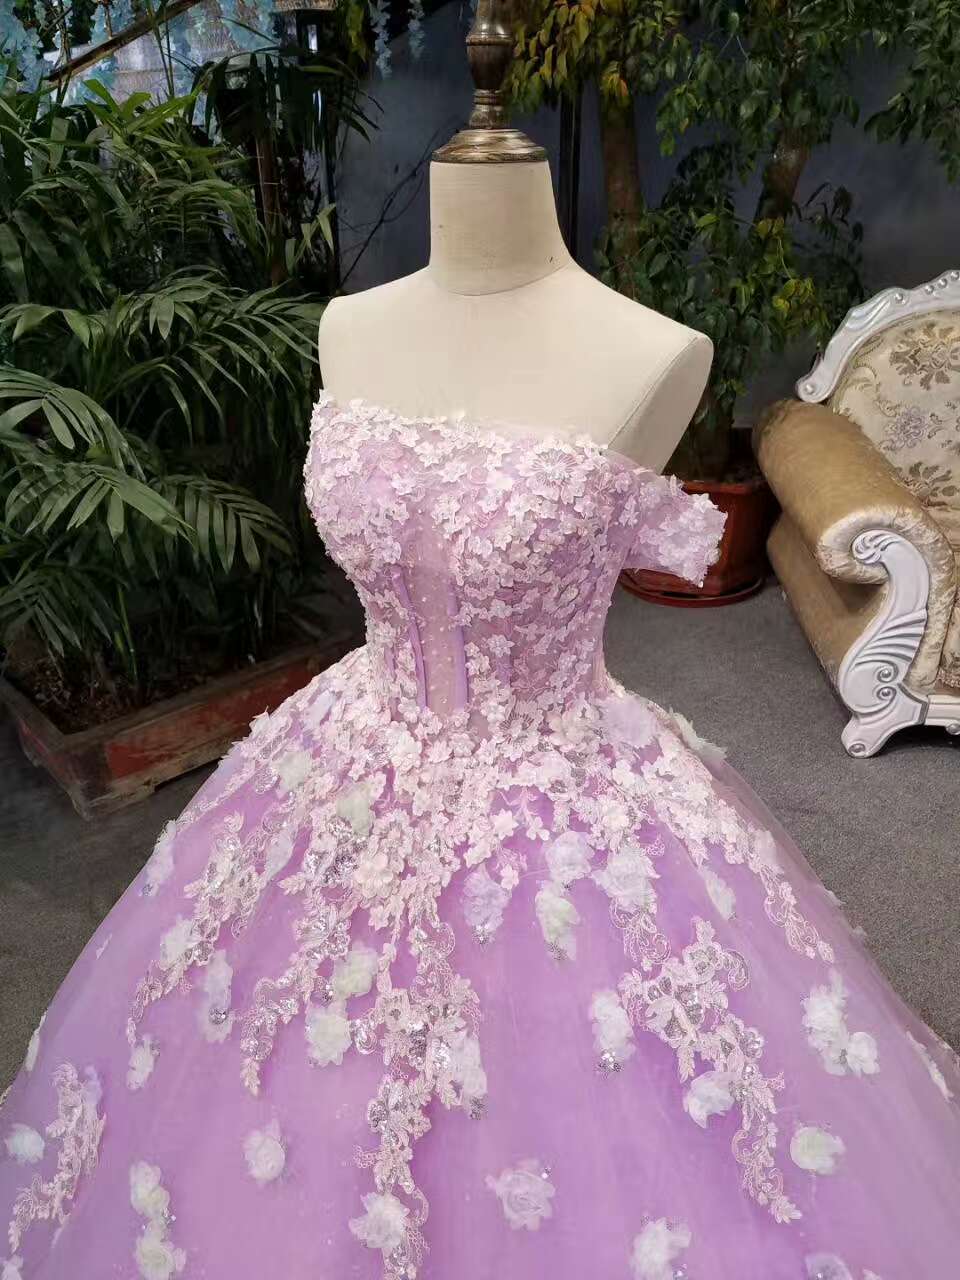 New Arrival Floral Wedding Dresses A-Line Floor Length Lace Up Off The Shoulder Ball Gown With Beads And Appliques     fg513